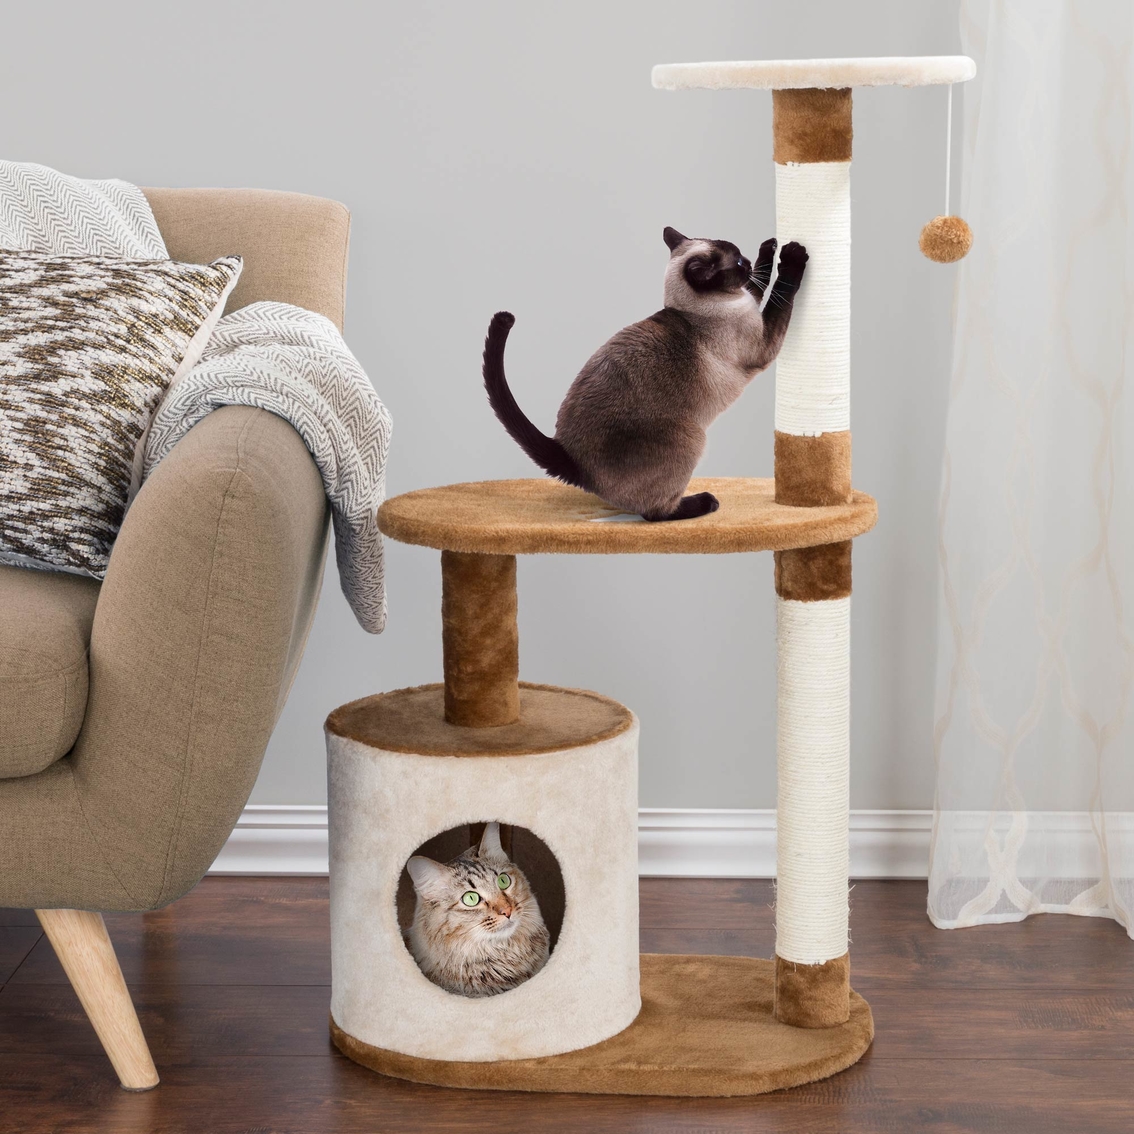 Petmaker Cat Tree Condo 3 Tier with Condo and Scratching Posts - Image 4 of 6